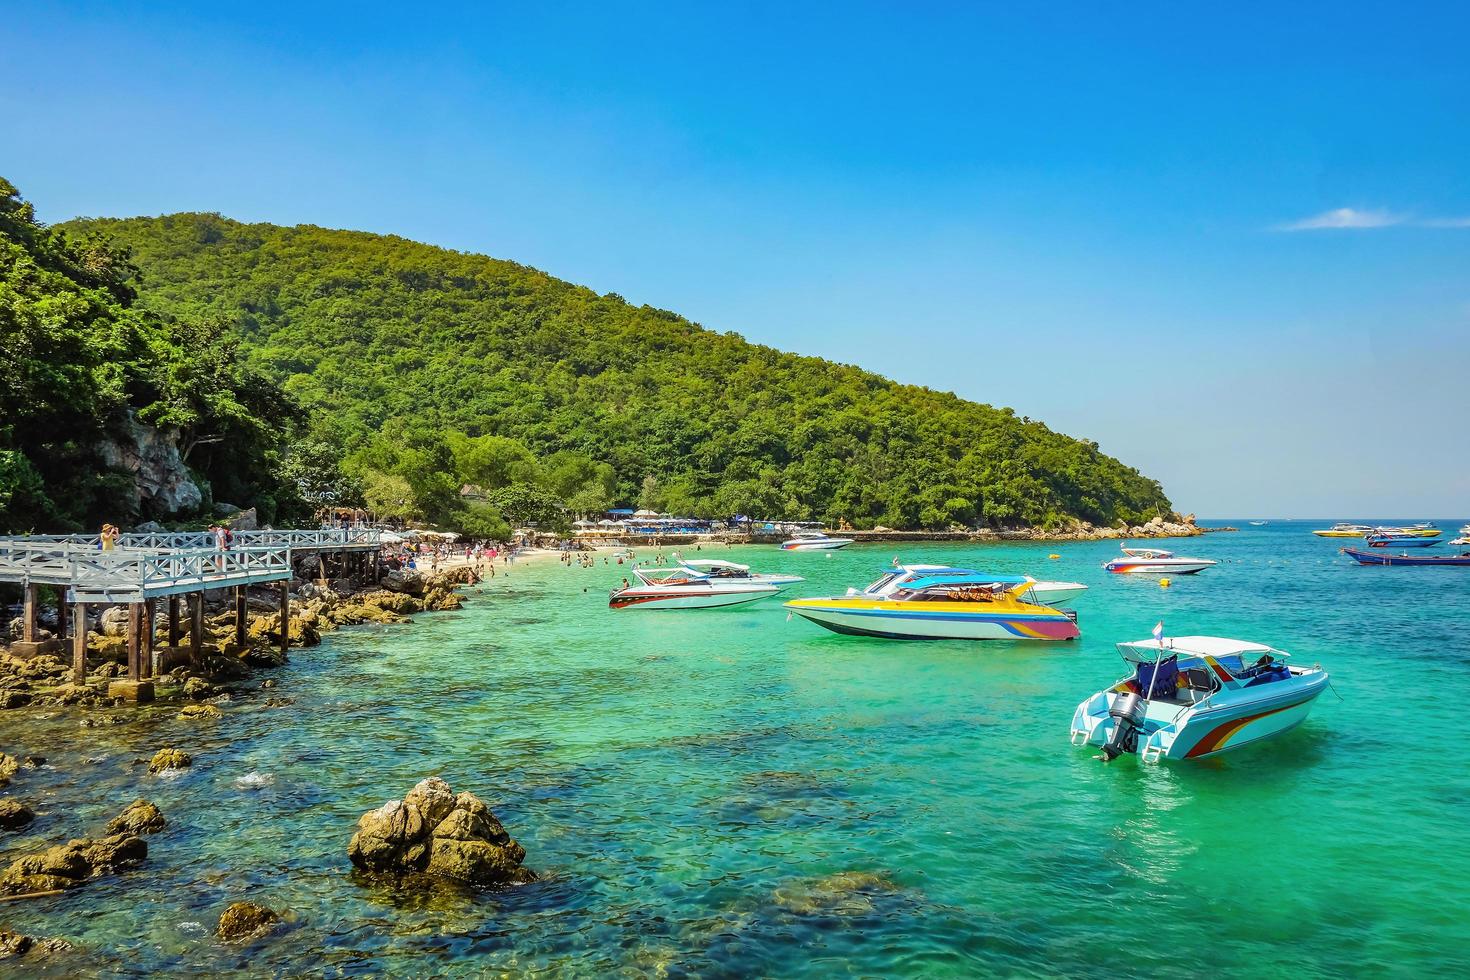 Tropical Idyllic Ocean and Boat on Koh lan Island in vacation time. Koh lan island is the Famous island near Pattaya city the Travel Destination in Thailand,Thailand holiday concept photo